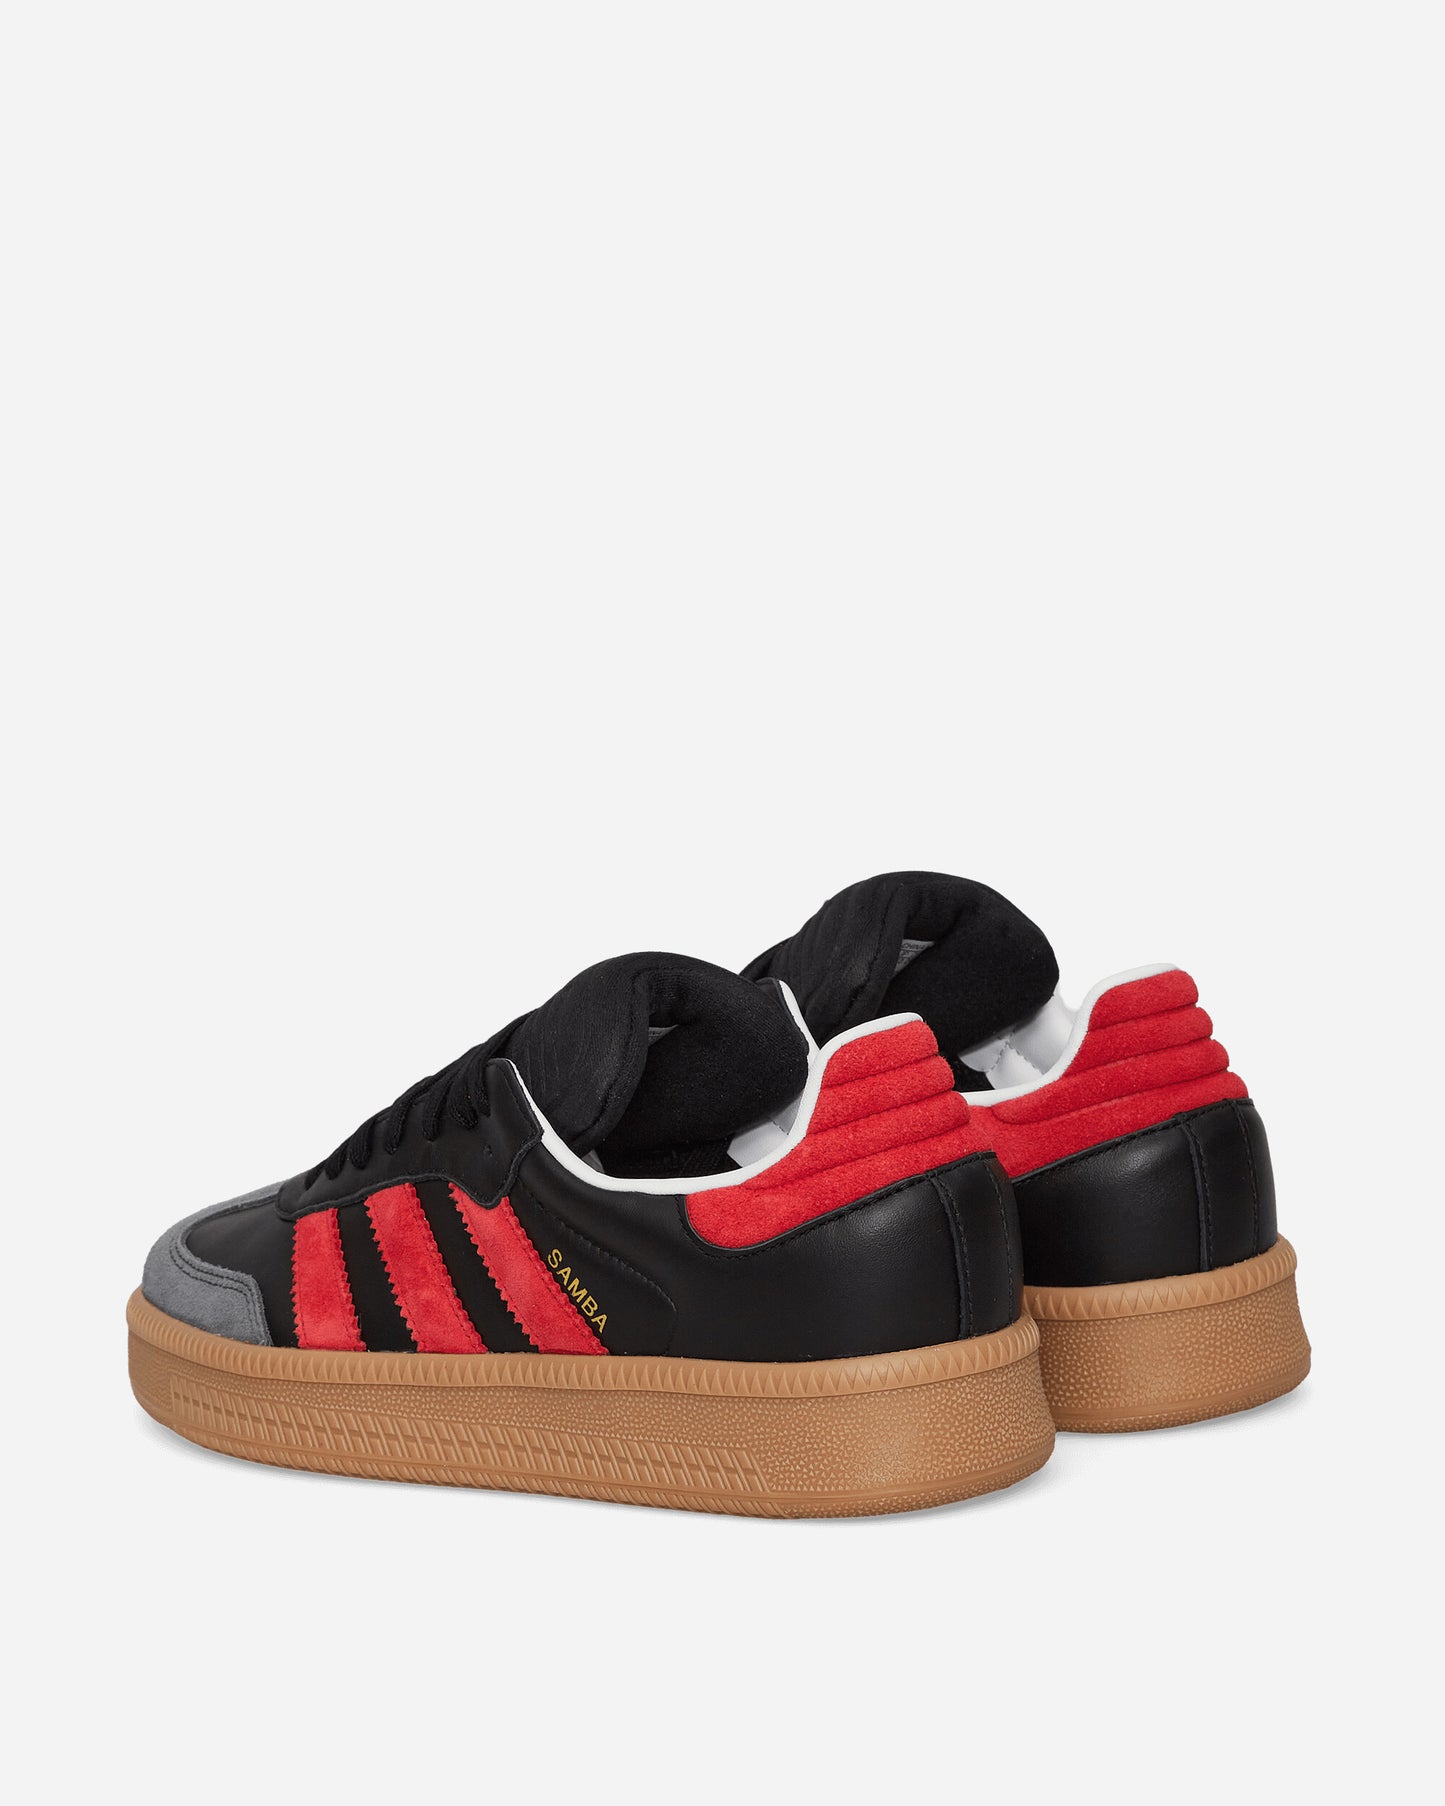 adidas Samba Xlg Core Black/Better Scarlet Sneakers Low IE9178